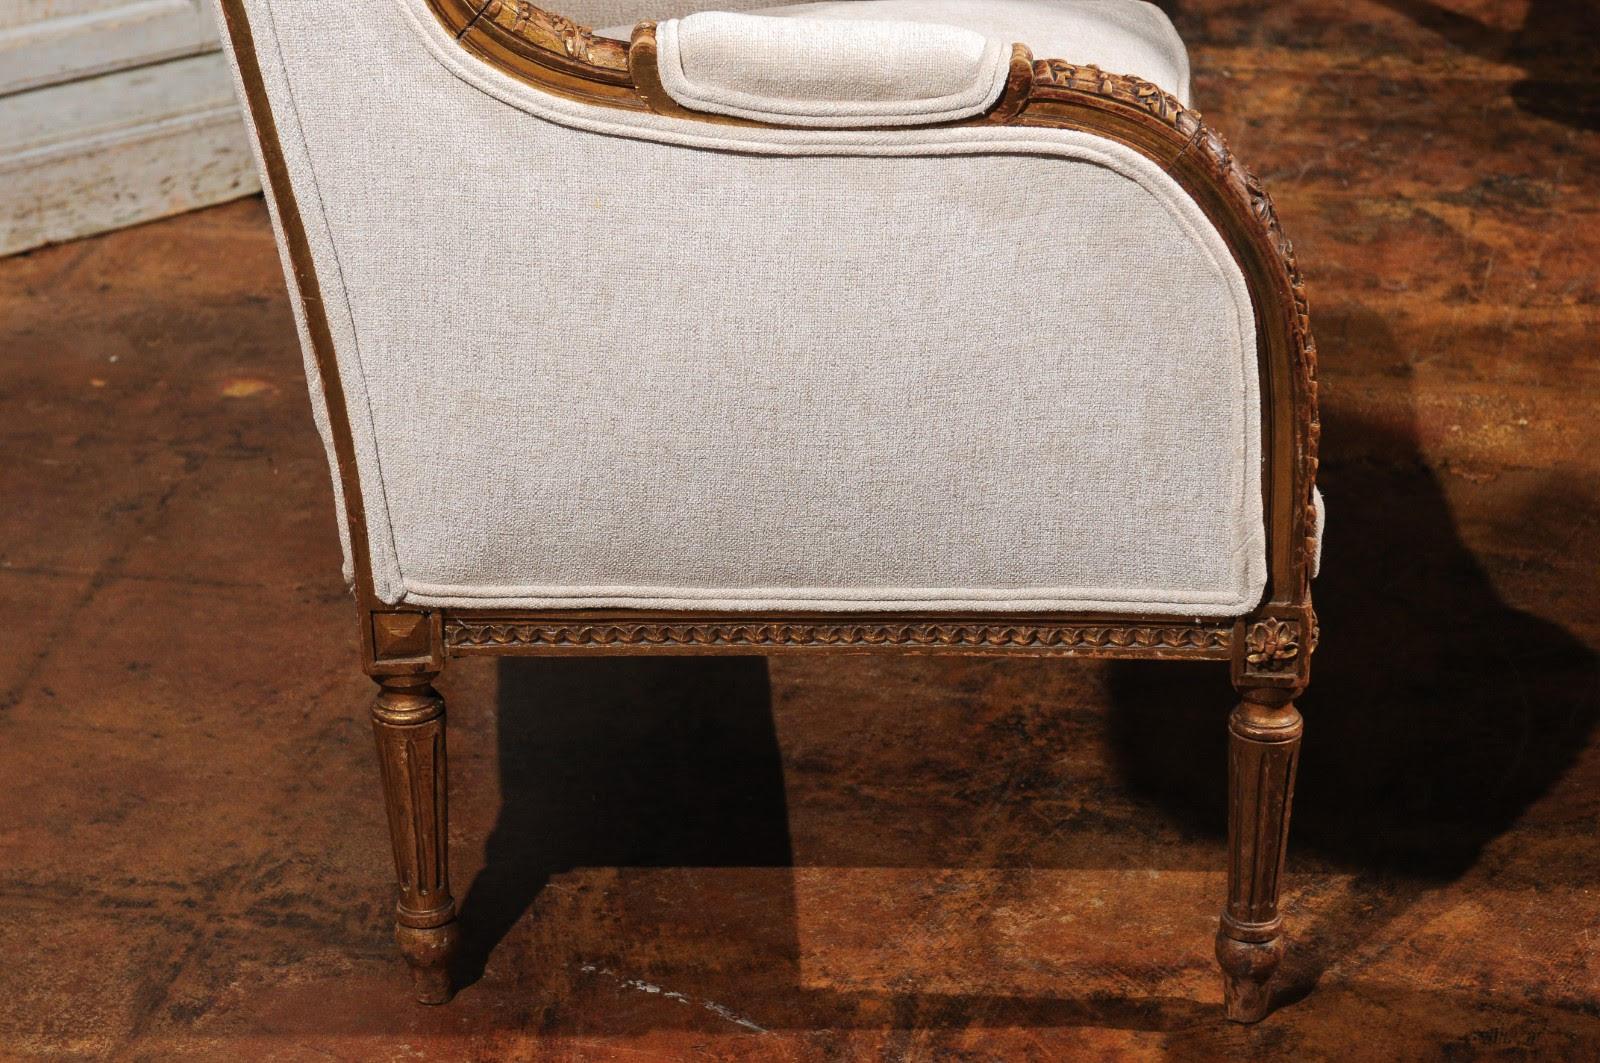 A French Louis XVI style wingback chair from the 19th century, with richly carved décor, intertwining beads, foliage and new upholstery. This French Louis XVI style bergère à oreilles features an exceptional hand carved décor on the frame and has